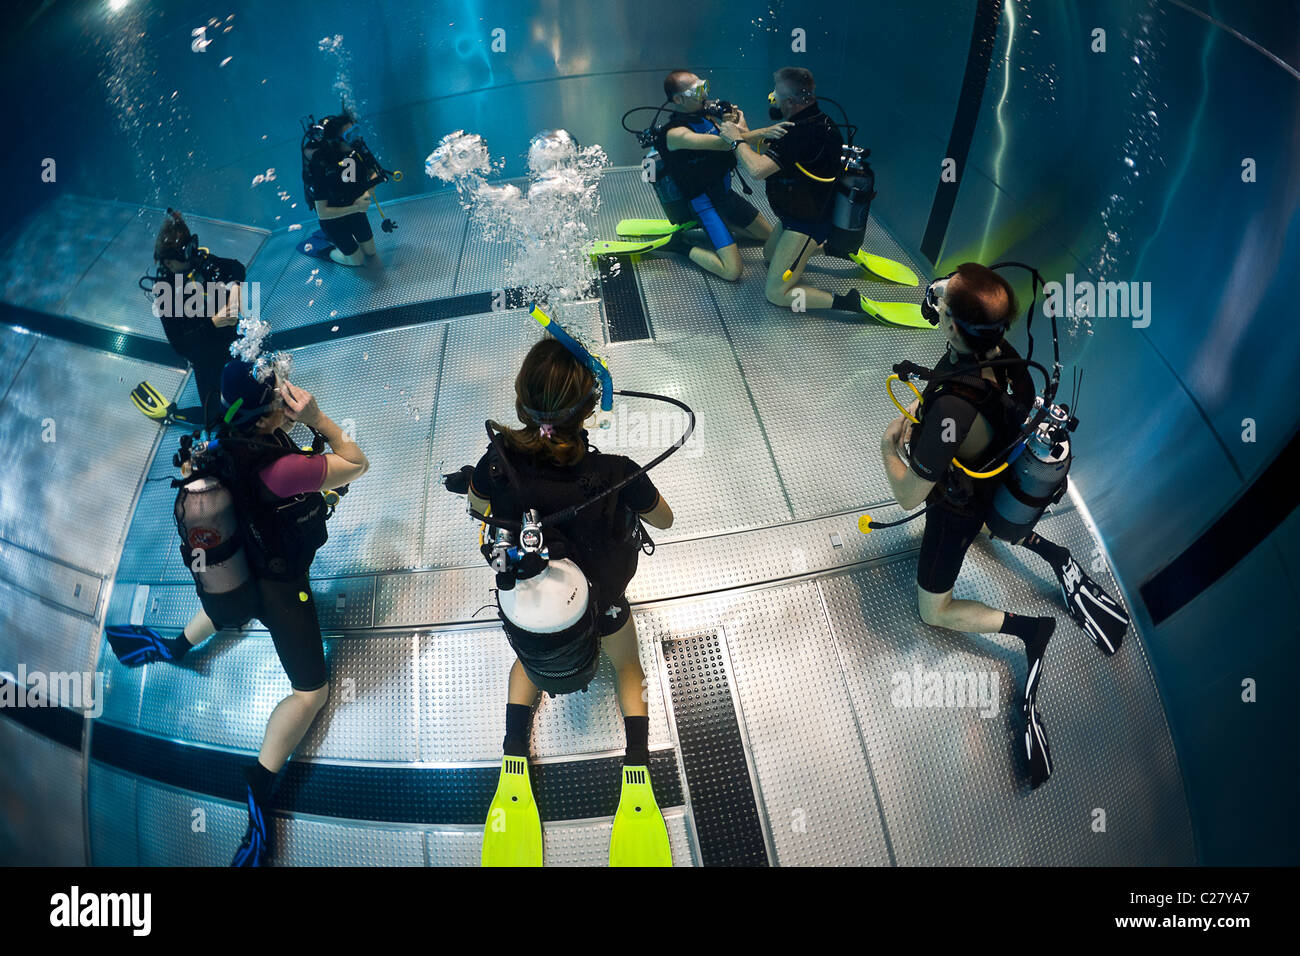 A scuba diving training session in a swimming pool (France). Scuba instruction in pool. Stock Photo